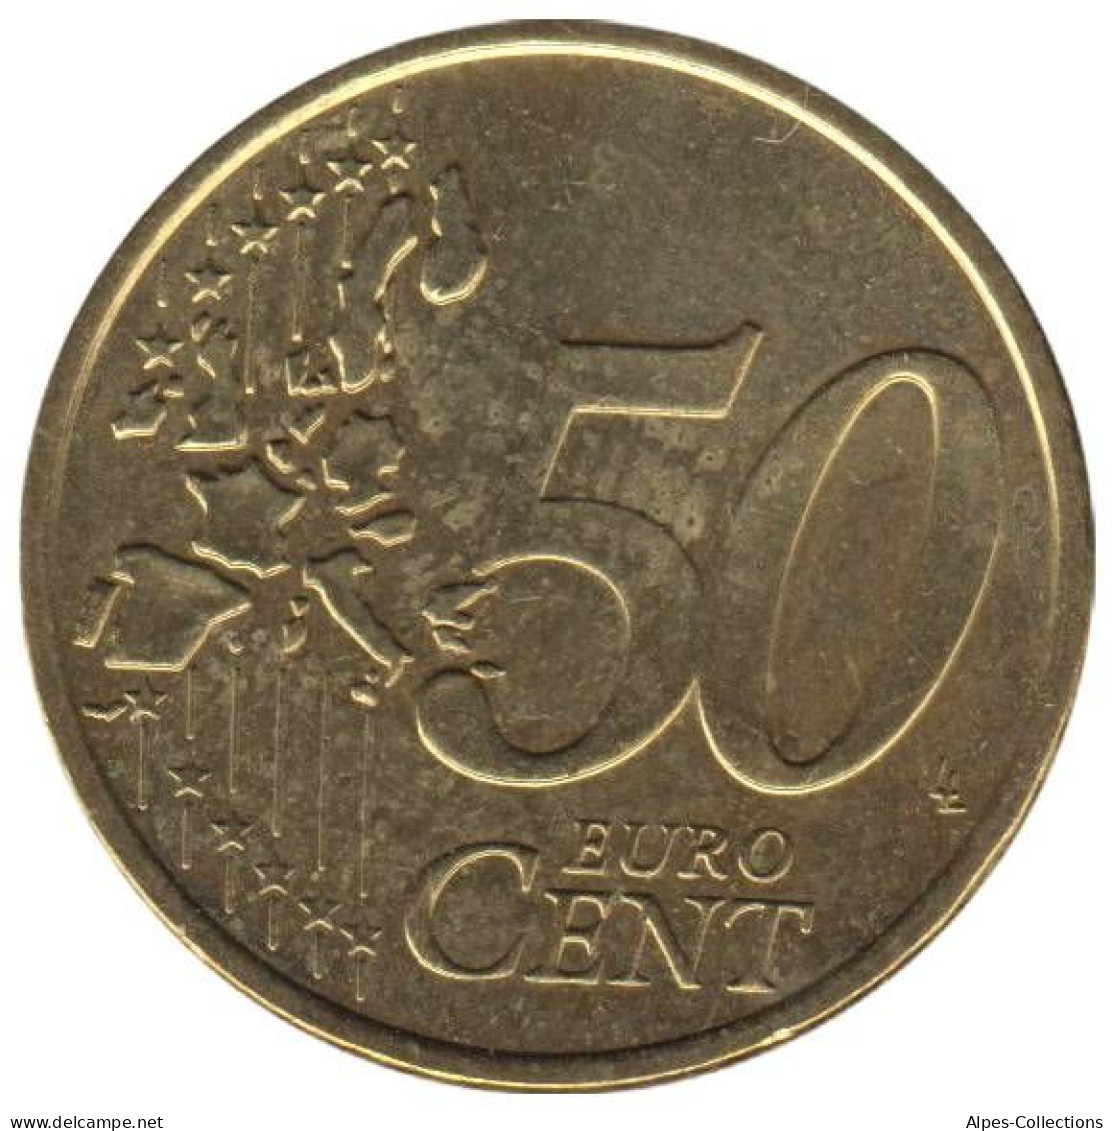 LU05006.1 - LUXEMBOURG - 50 Cents - 2006 - Luxembourg